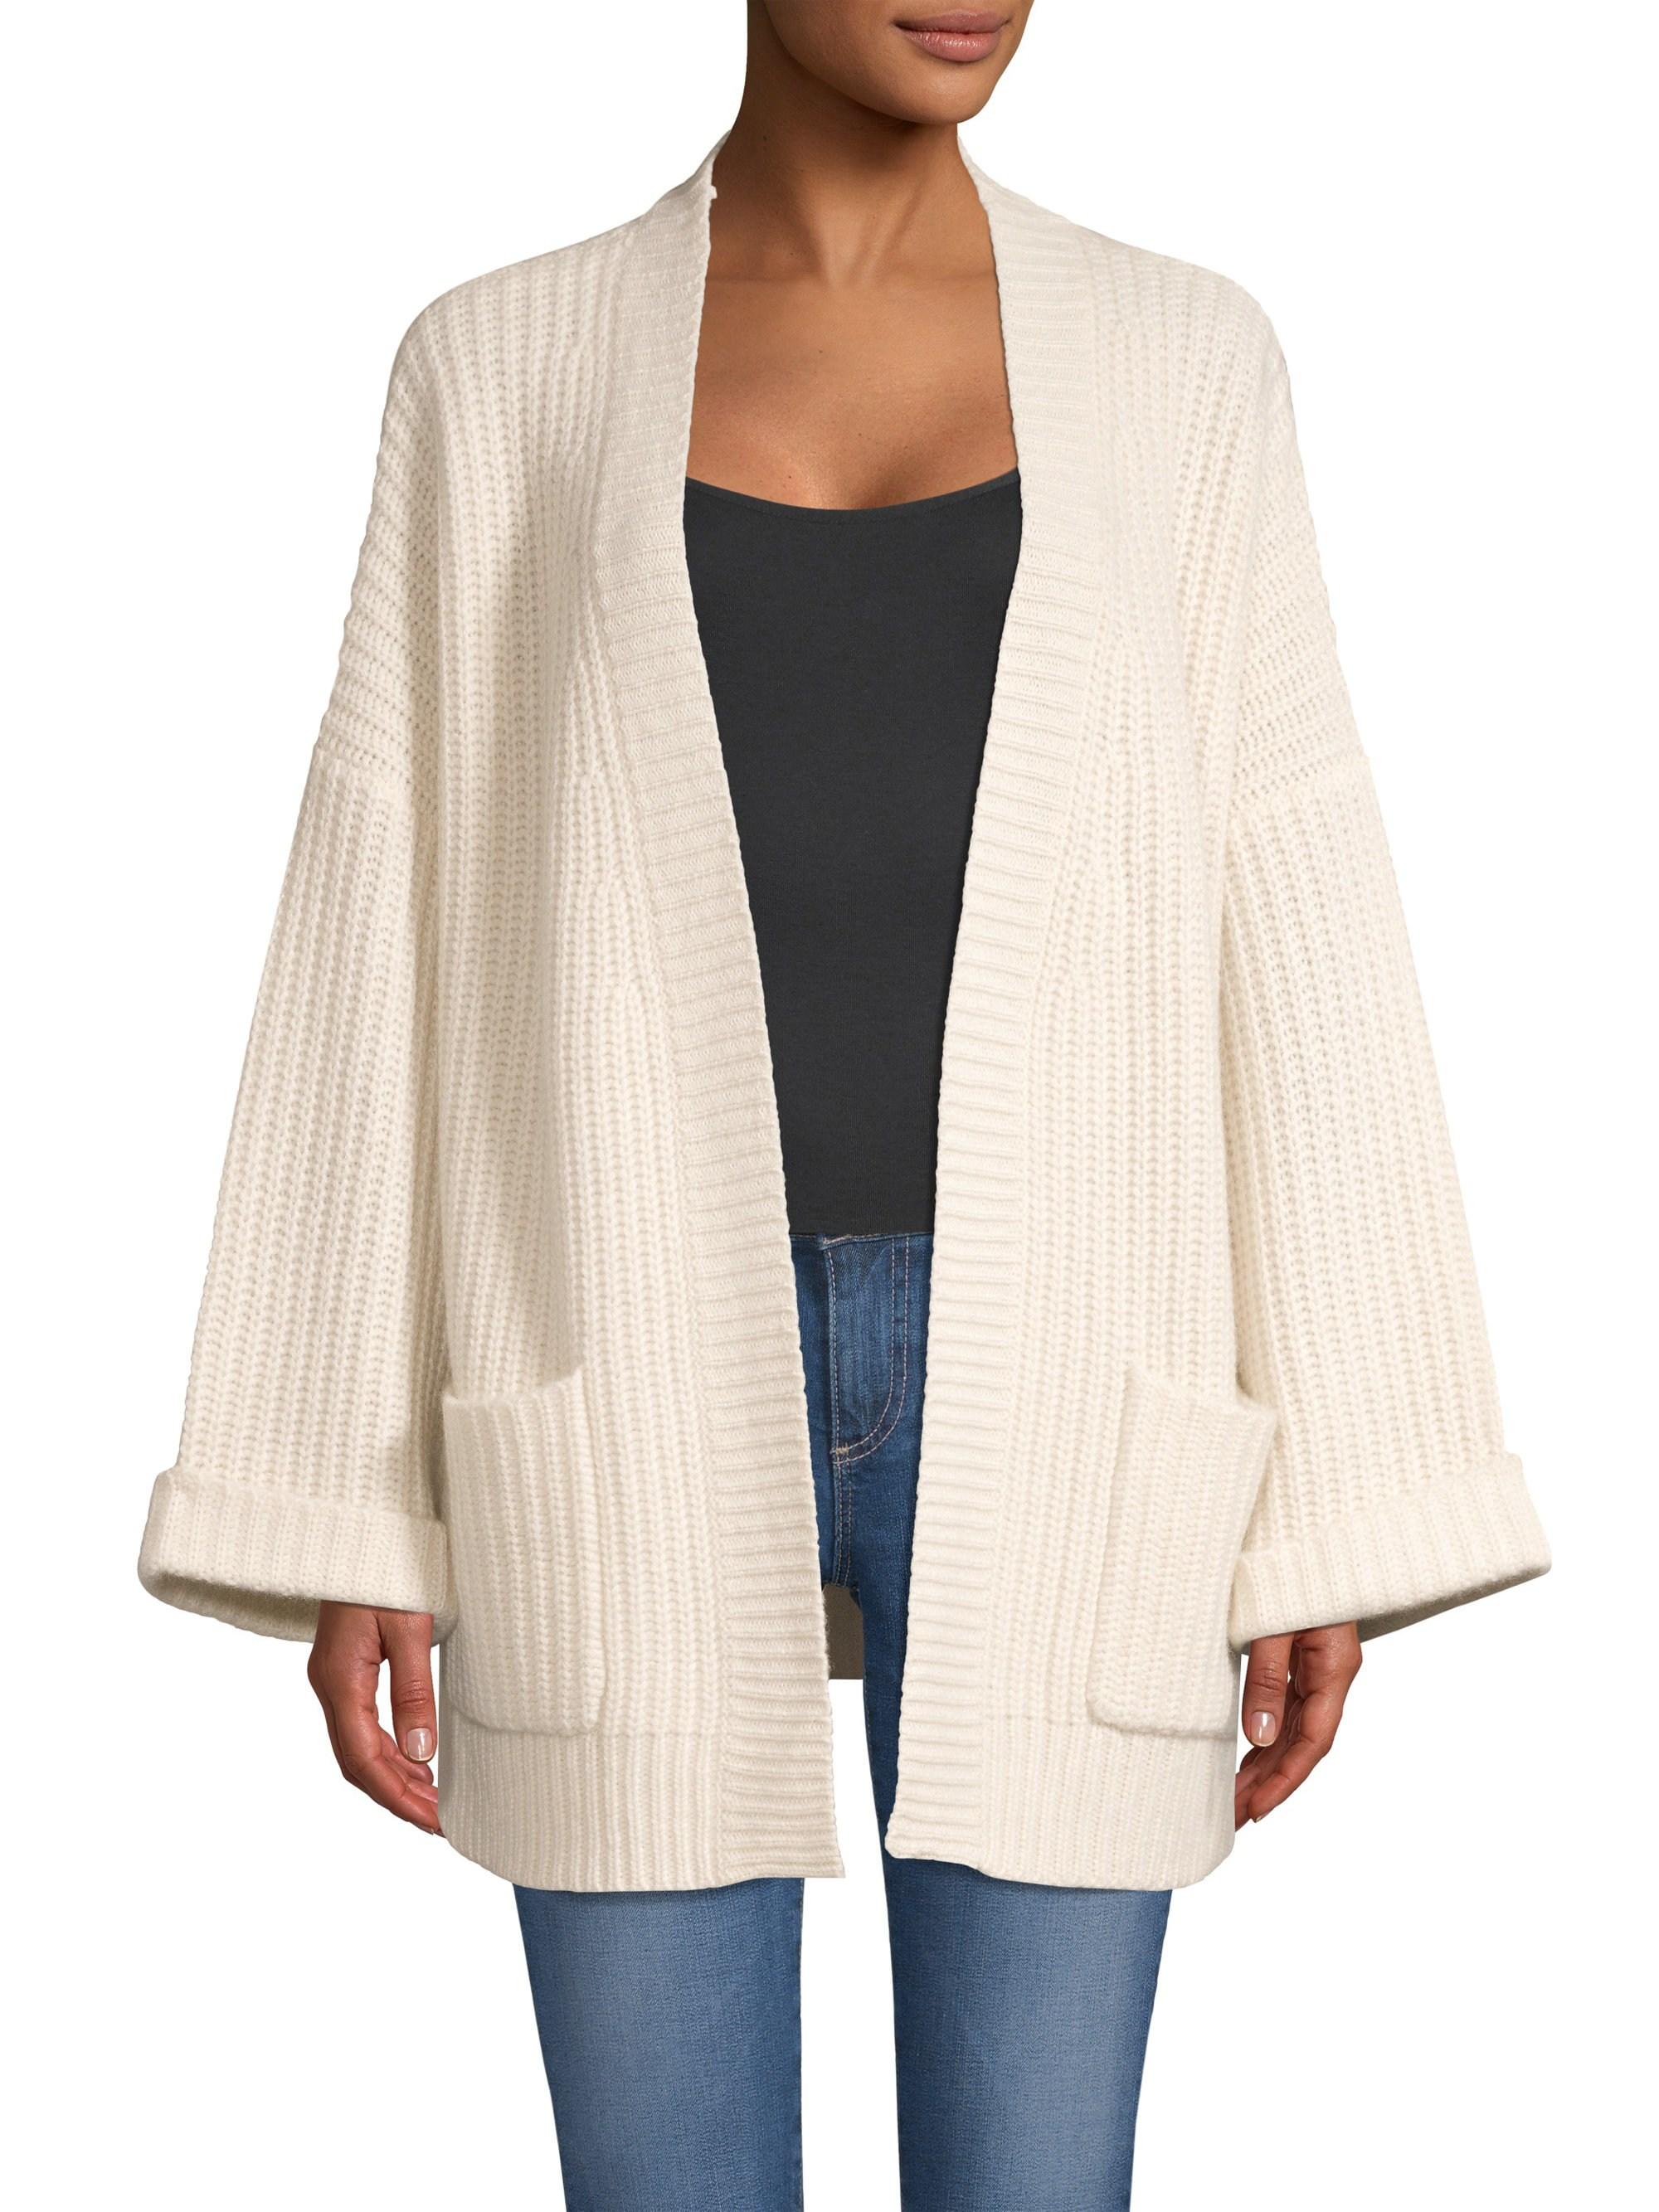 360cashmere Lizbeth Chunky Cashmere Cardigan in Natural | Lyst